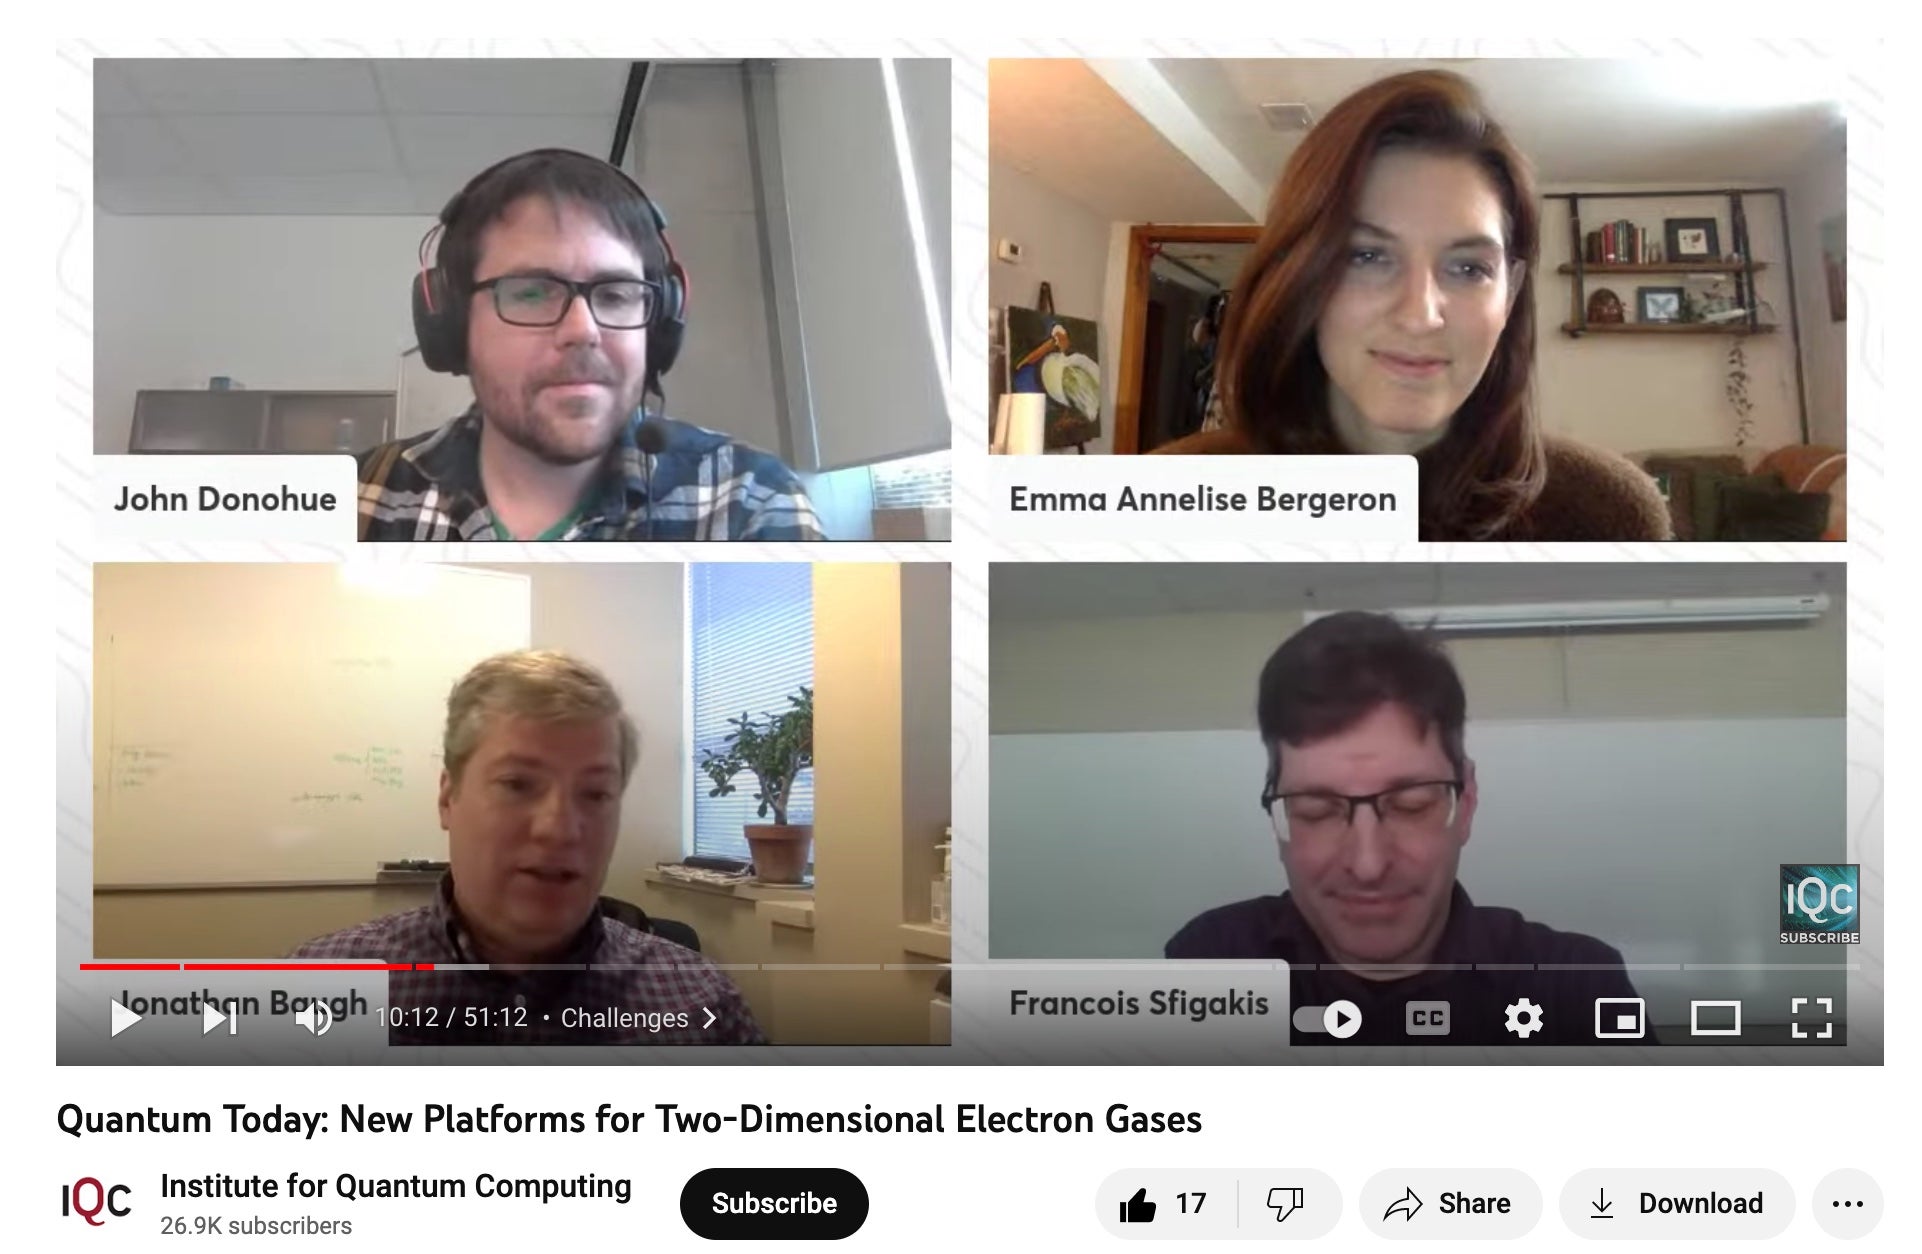 Online meeting with four attendees: John Donohue (top left), Emma Annelise Bergeron (top right), Prof. Baugh (bottom left), and Francois Sfigakis (bottom left)